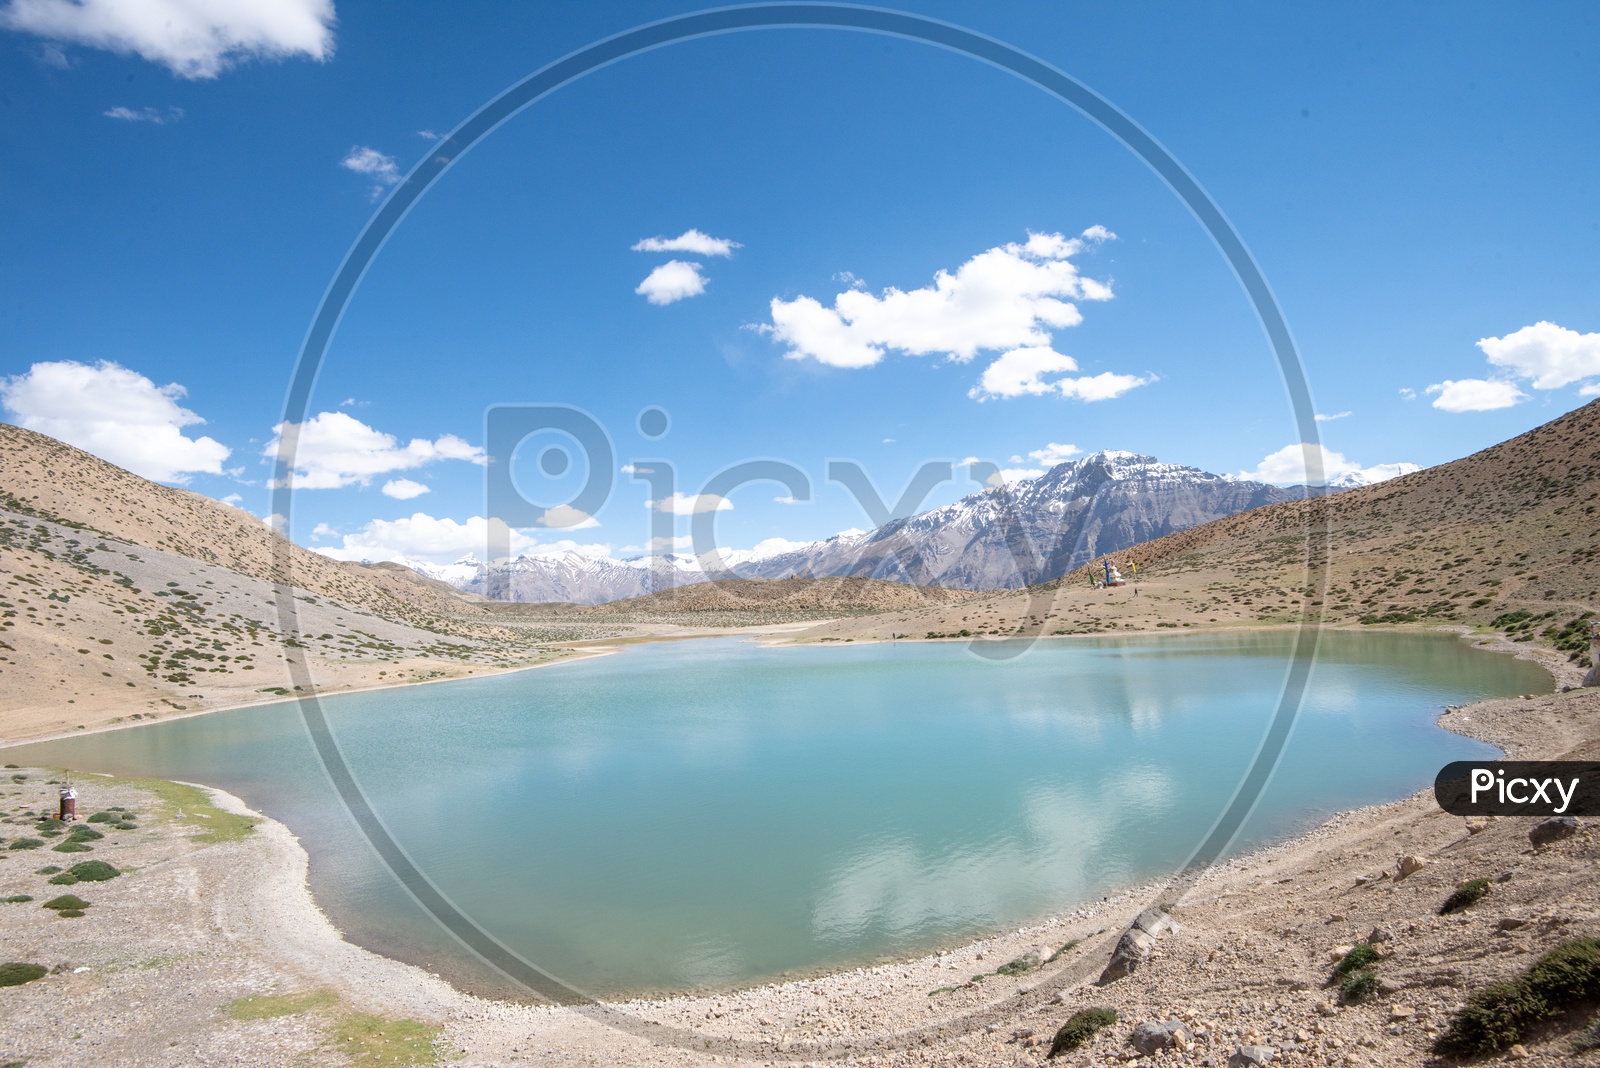 Dhankar lake with mountain peaks in the background